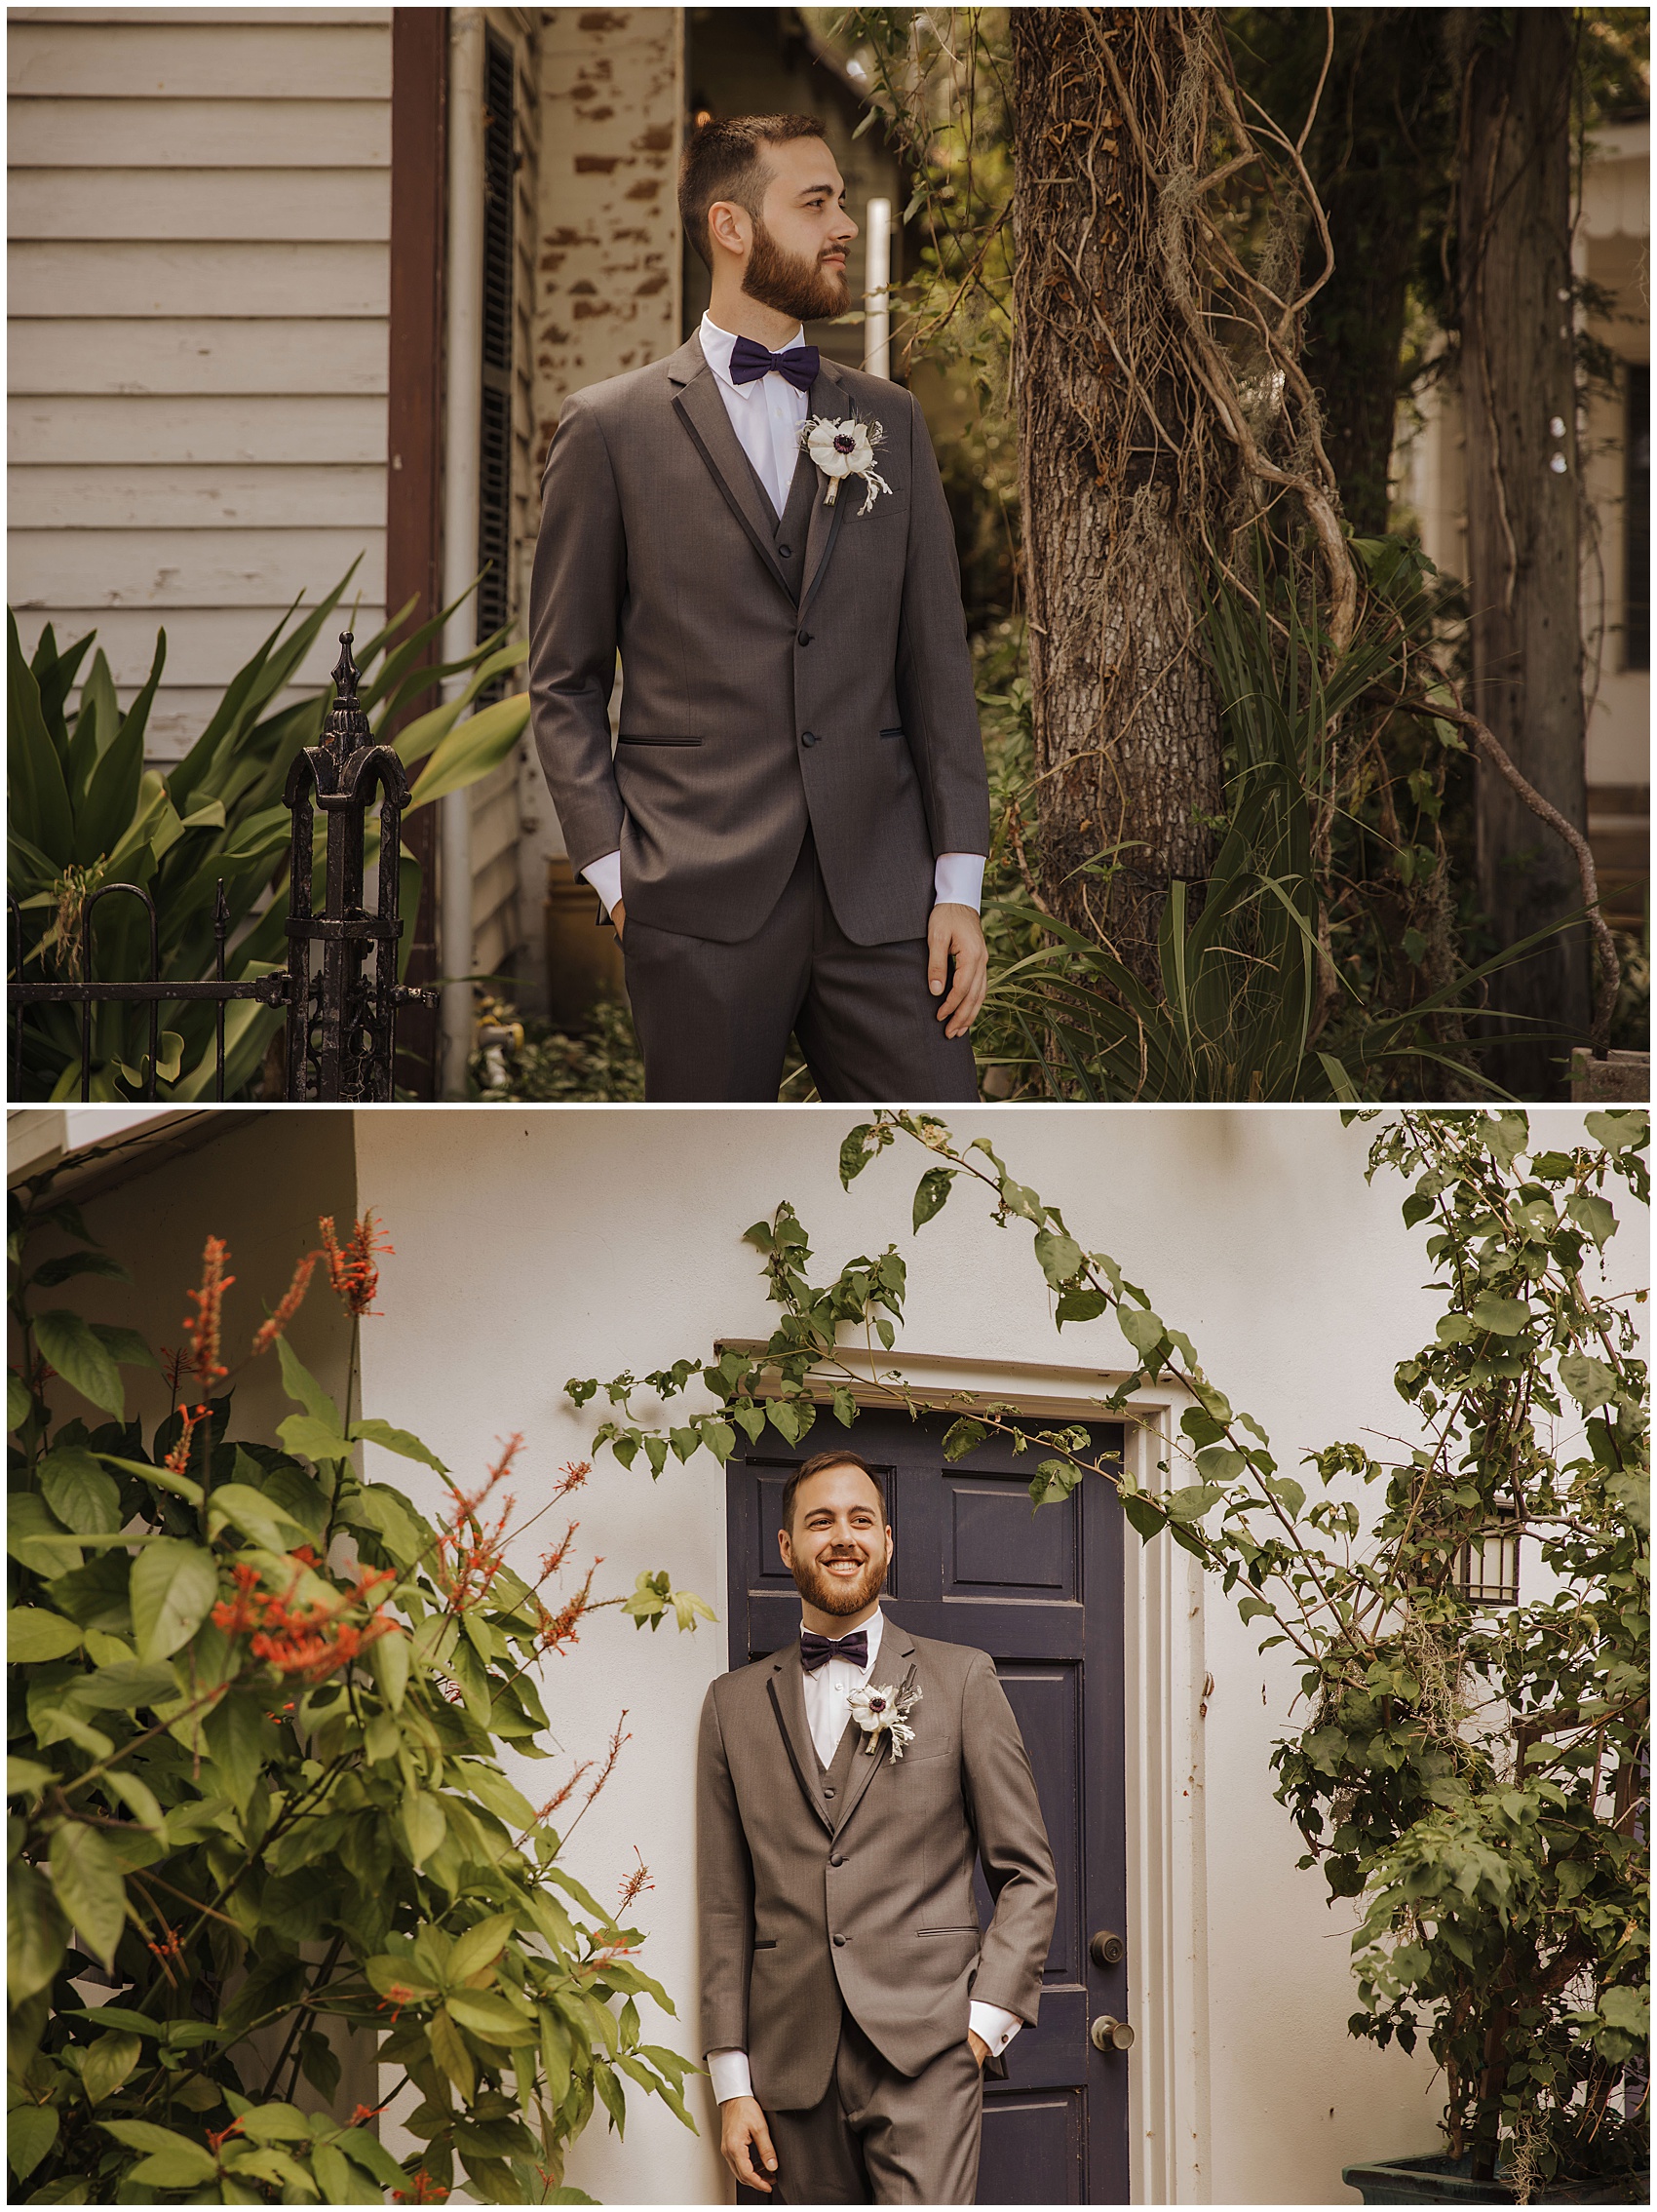 A groom stands with a hand in his pocket in a tropical garden